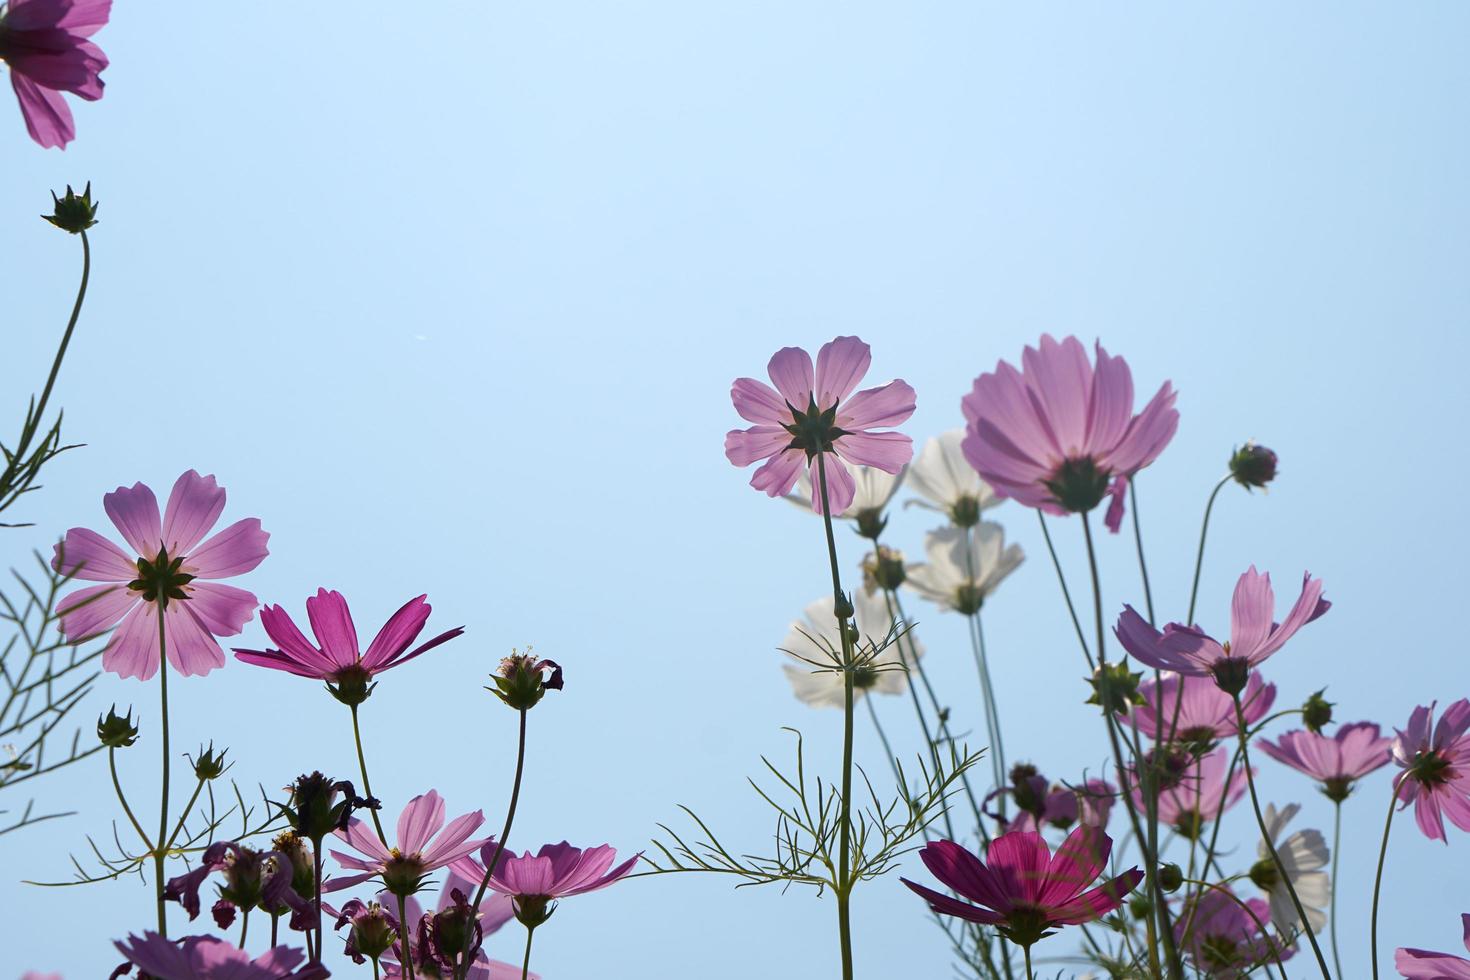 Beautiful cosmos flowers blooming in the sun blue sky background photo